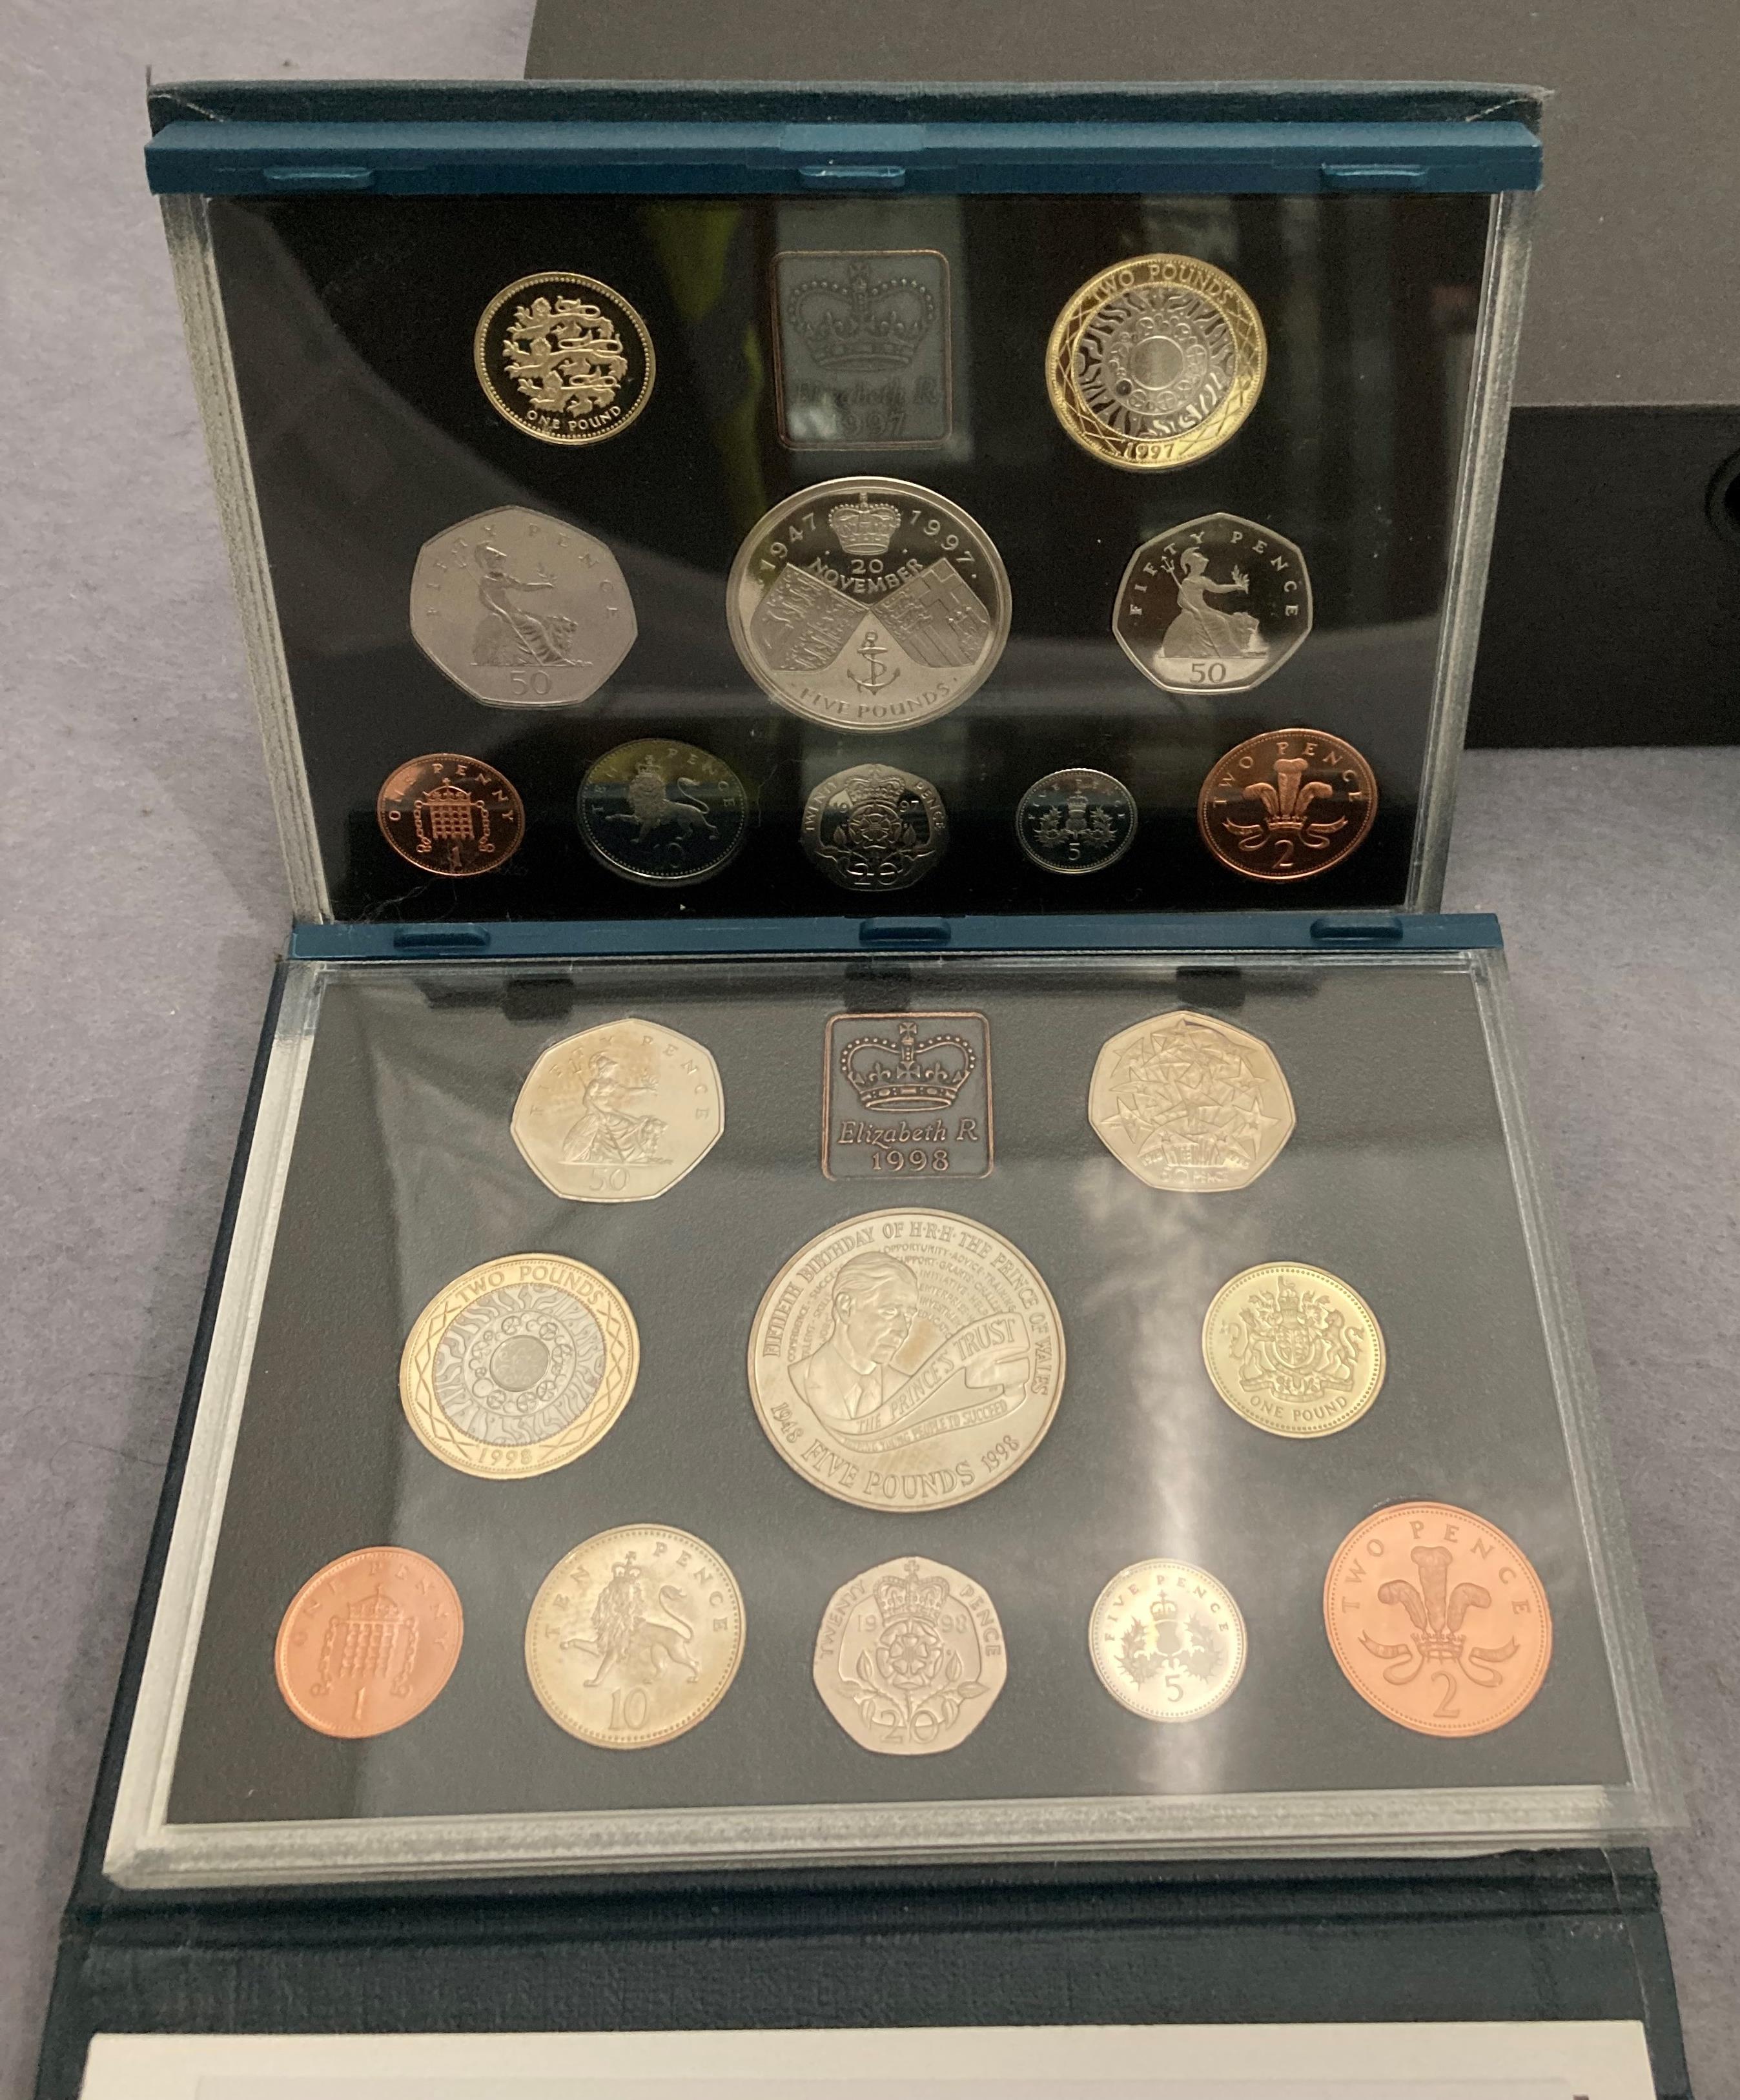 Three Royal Mint United Kingdon proof coin collection sets, years 1997, 1998, - Image 2 of 3